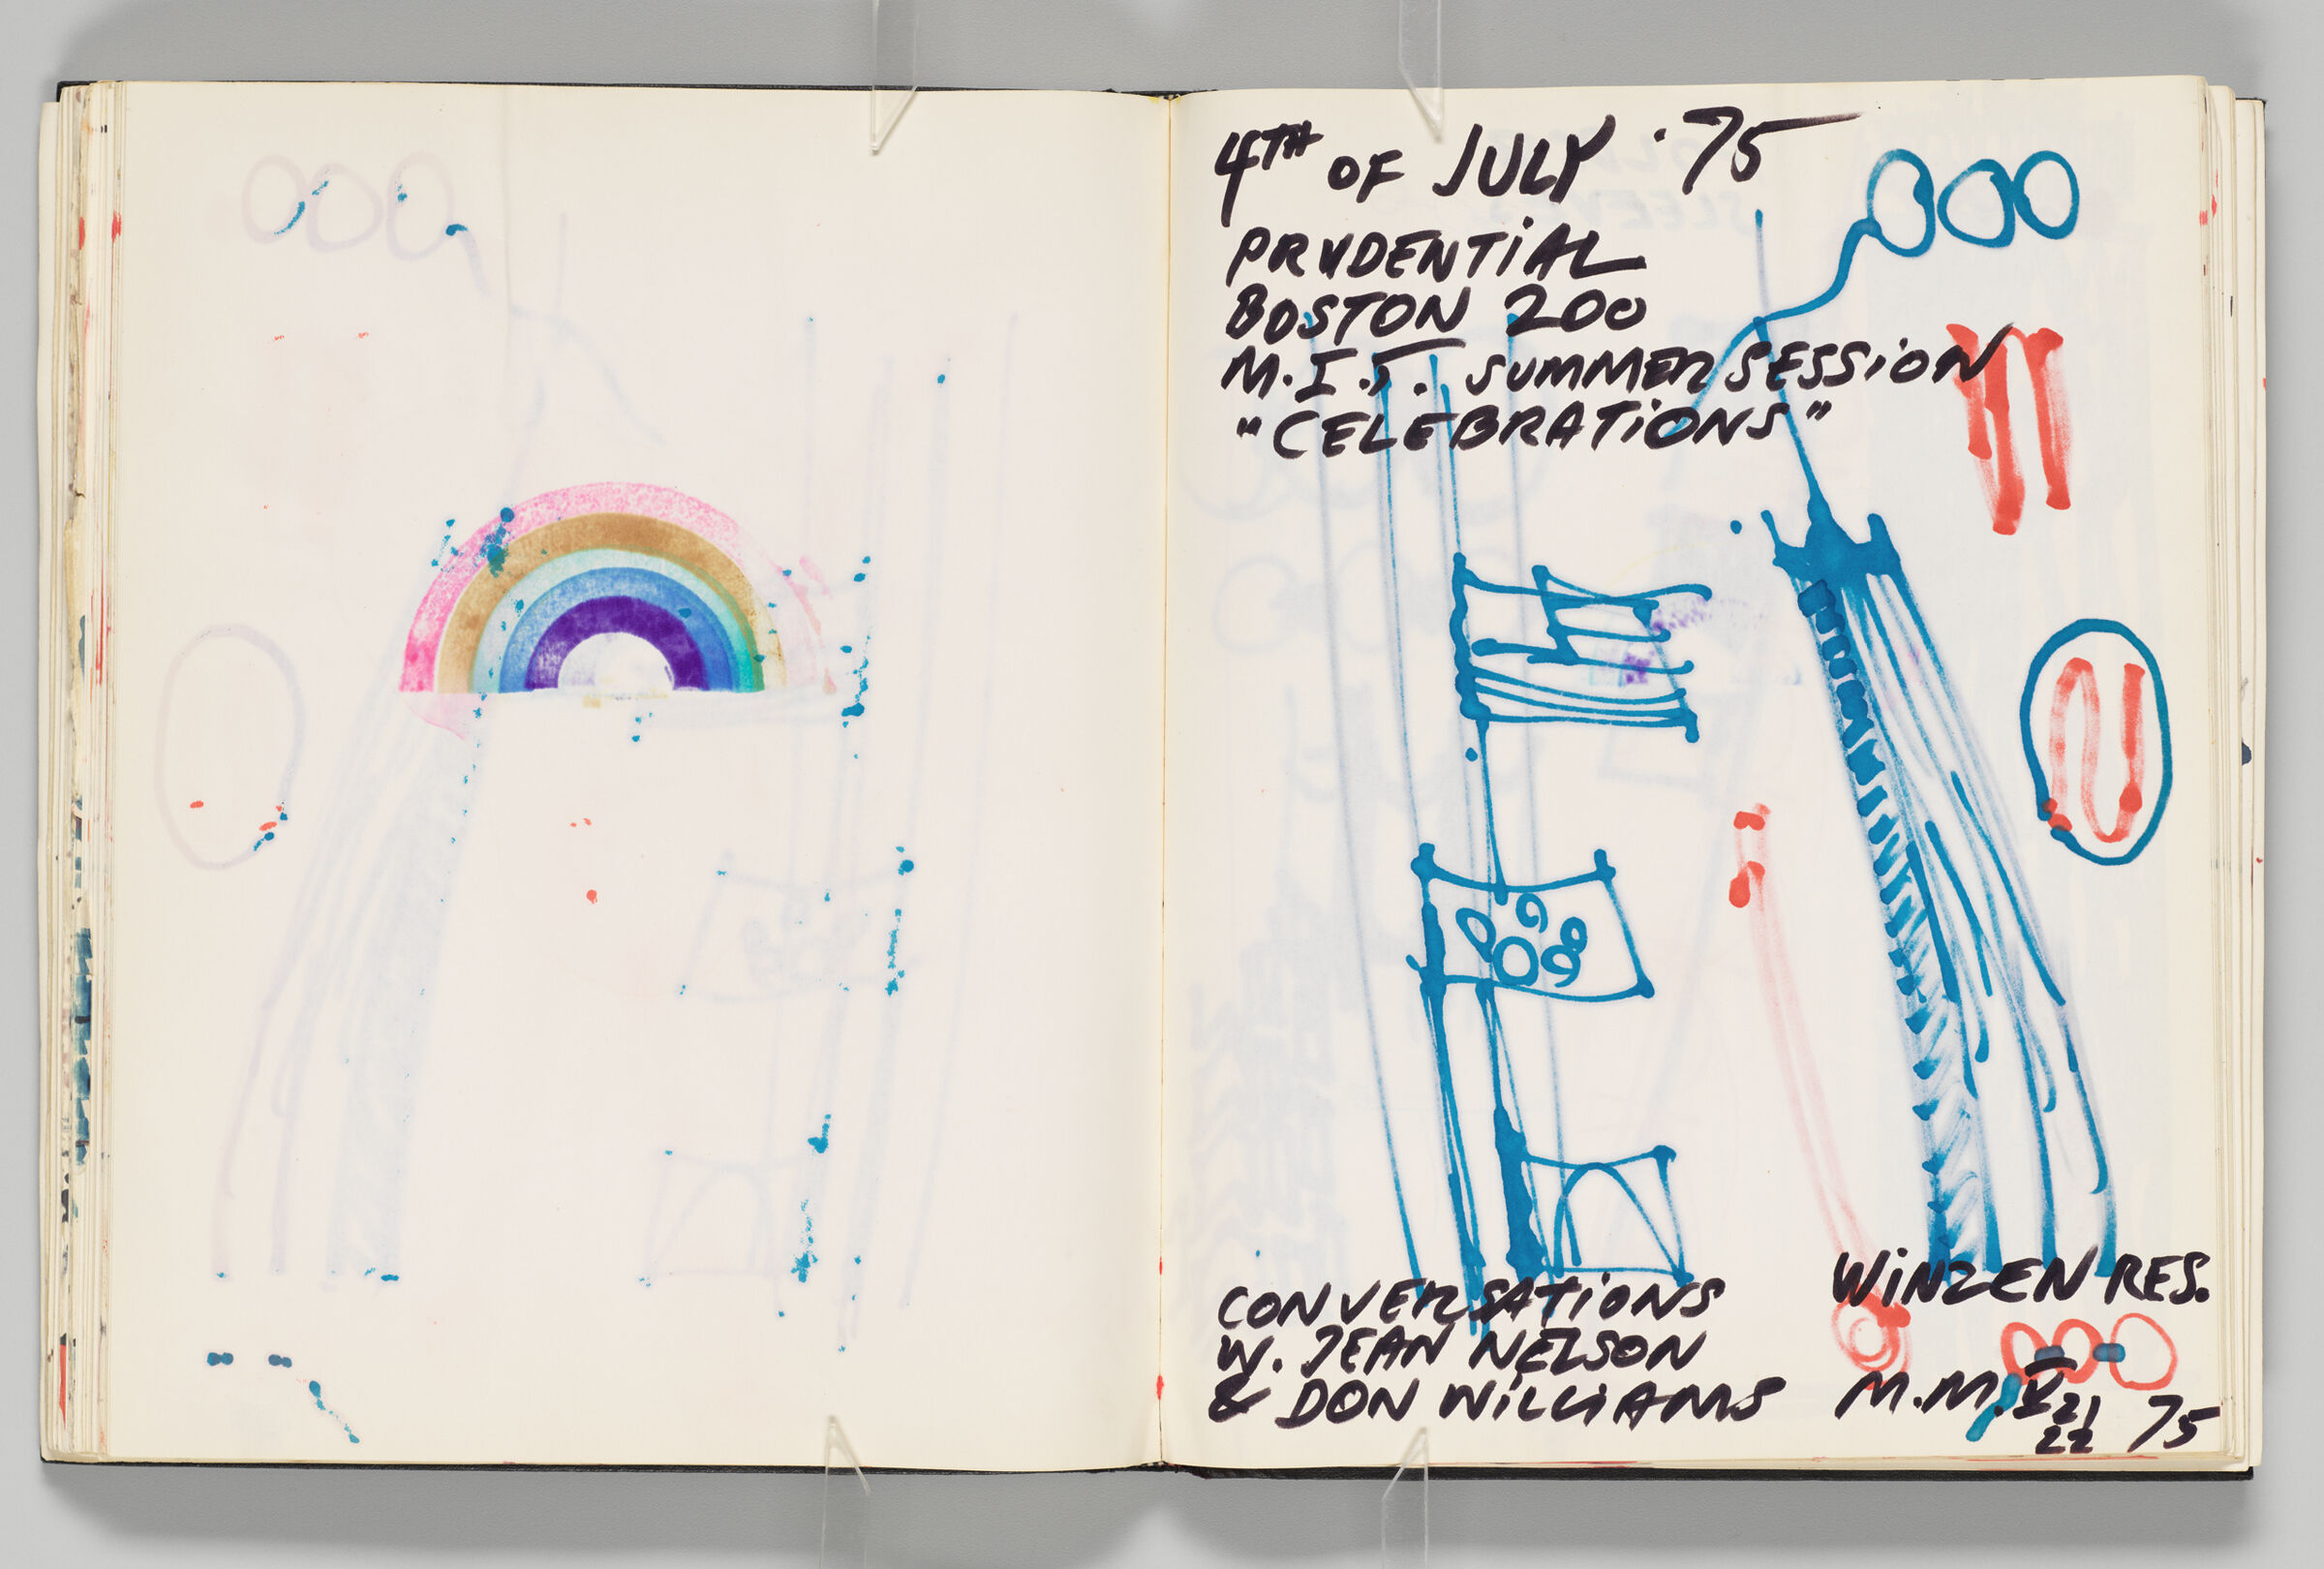 Untitled (Bleed-Through Of Previous Page, Left Page); Untitled (Notes And Bleed-Through Of Following Page, Right Page)